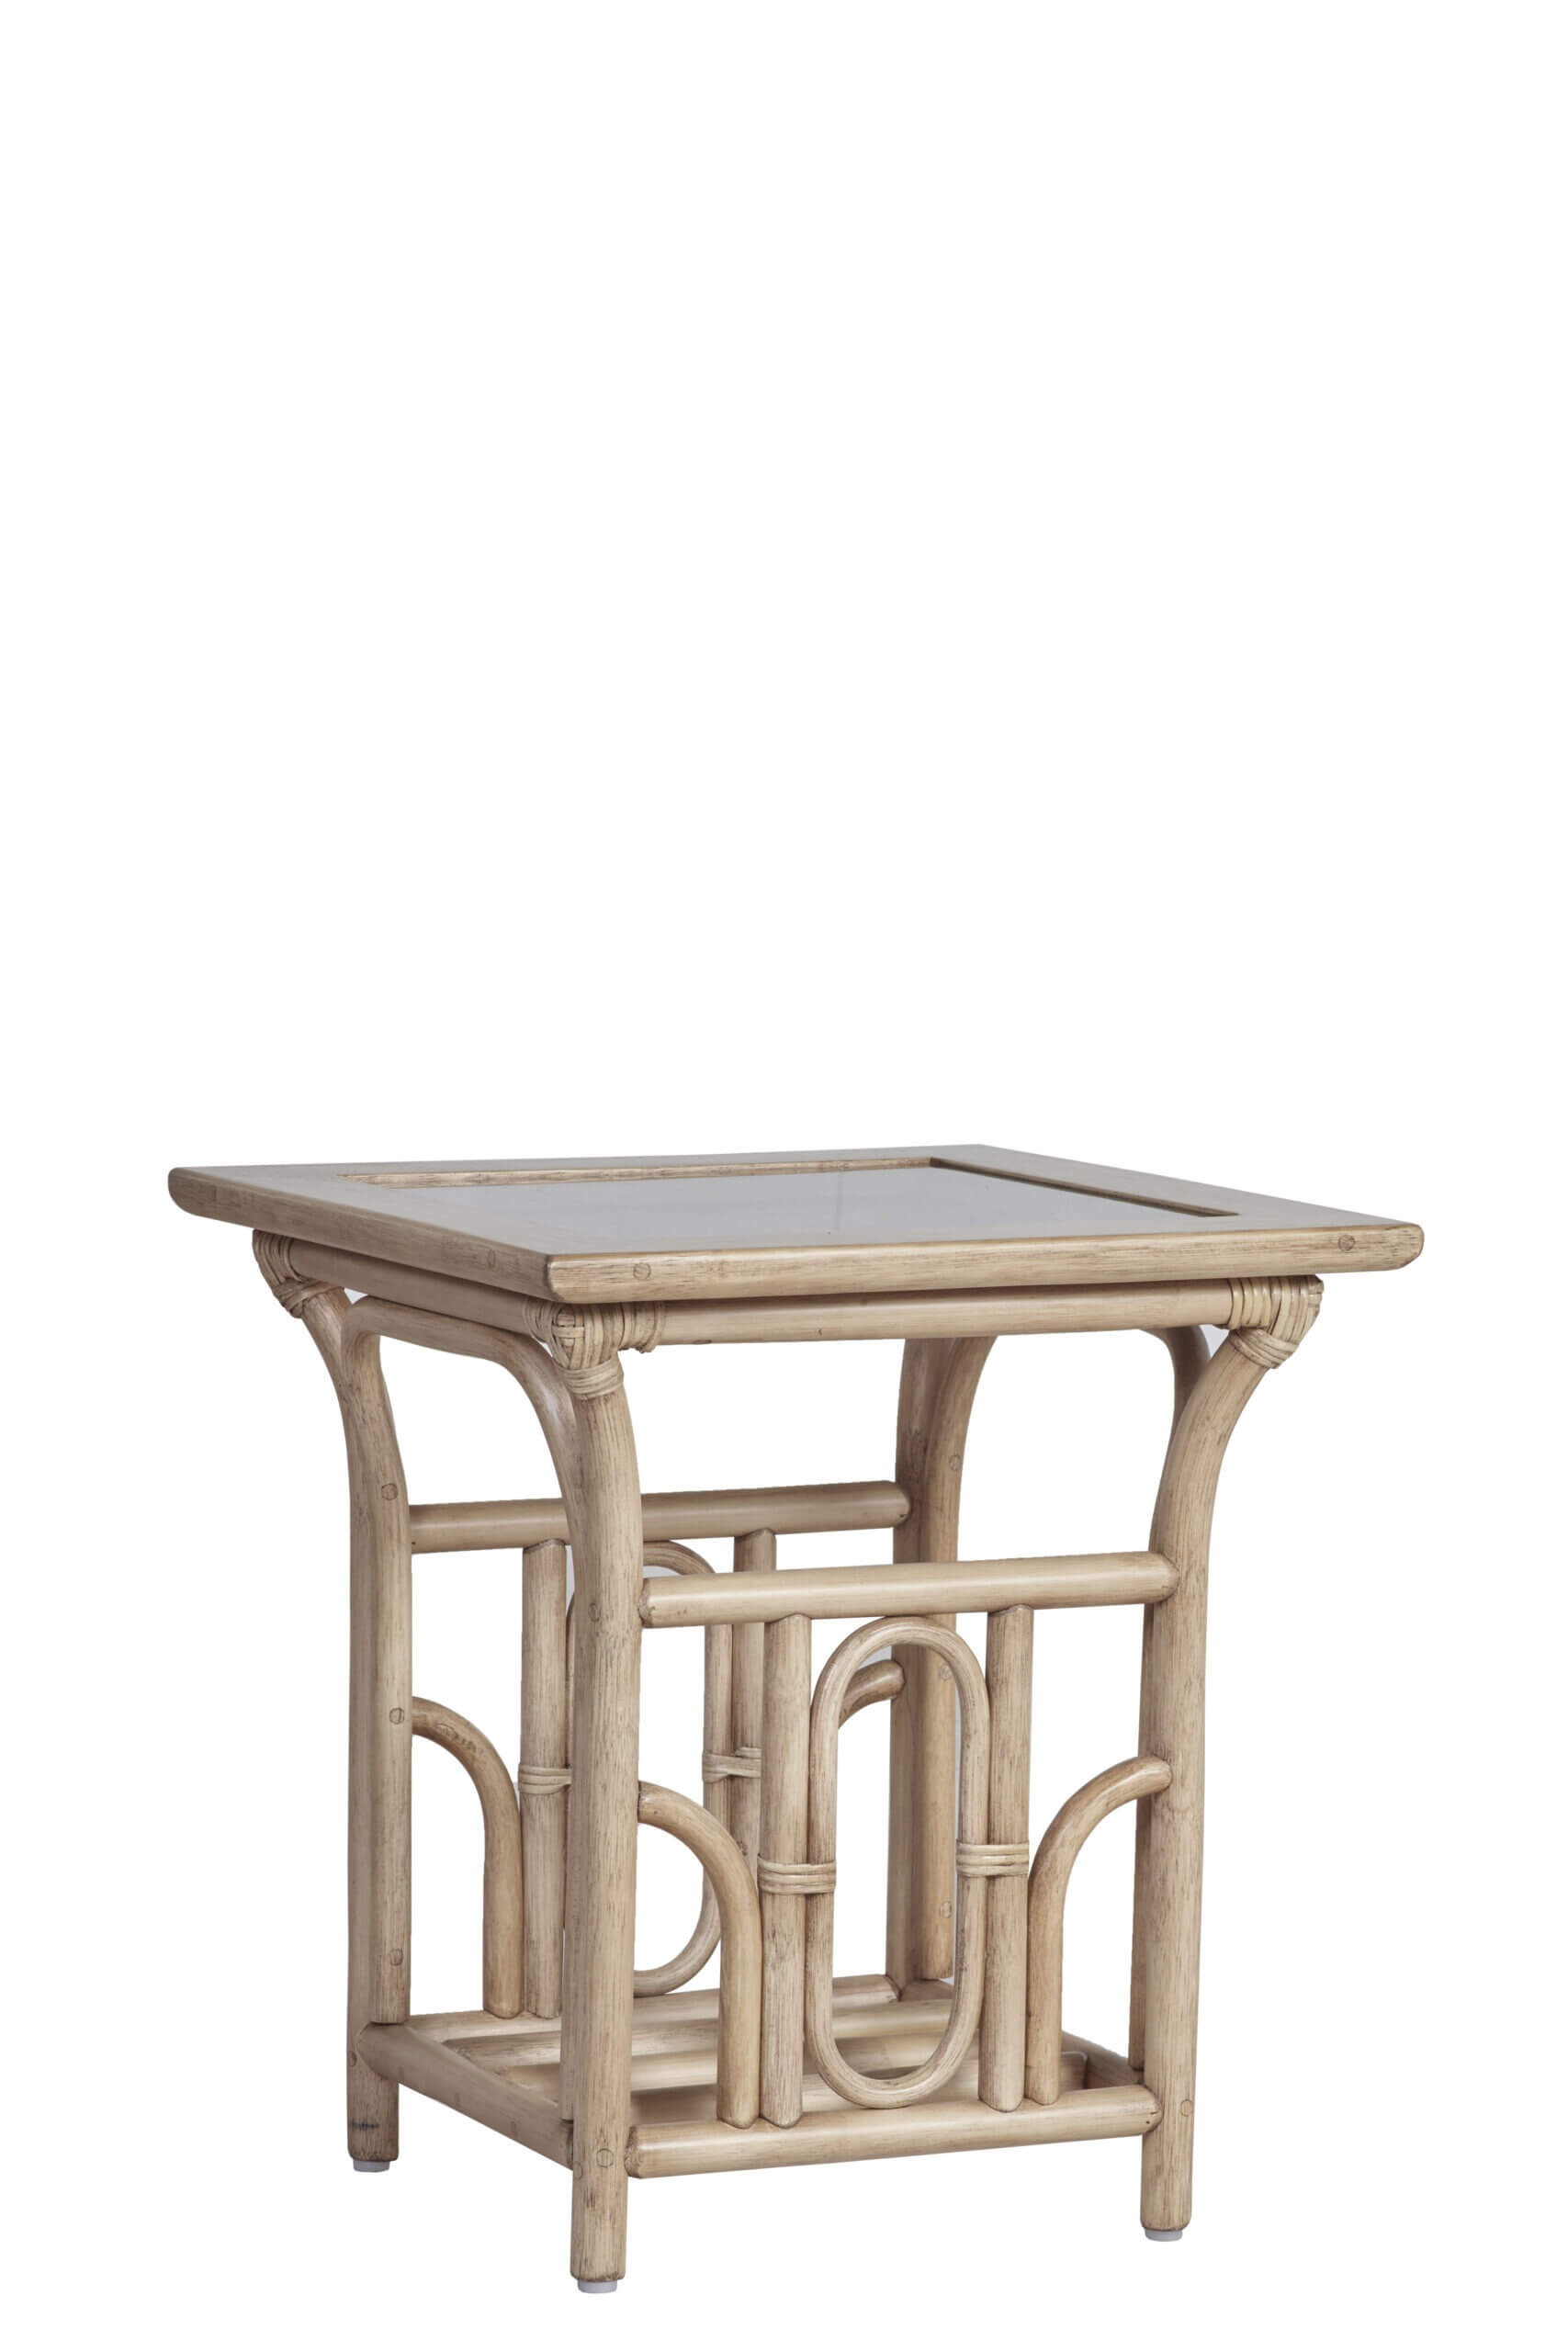 Showing image for Catania side table